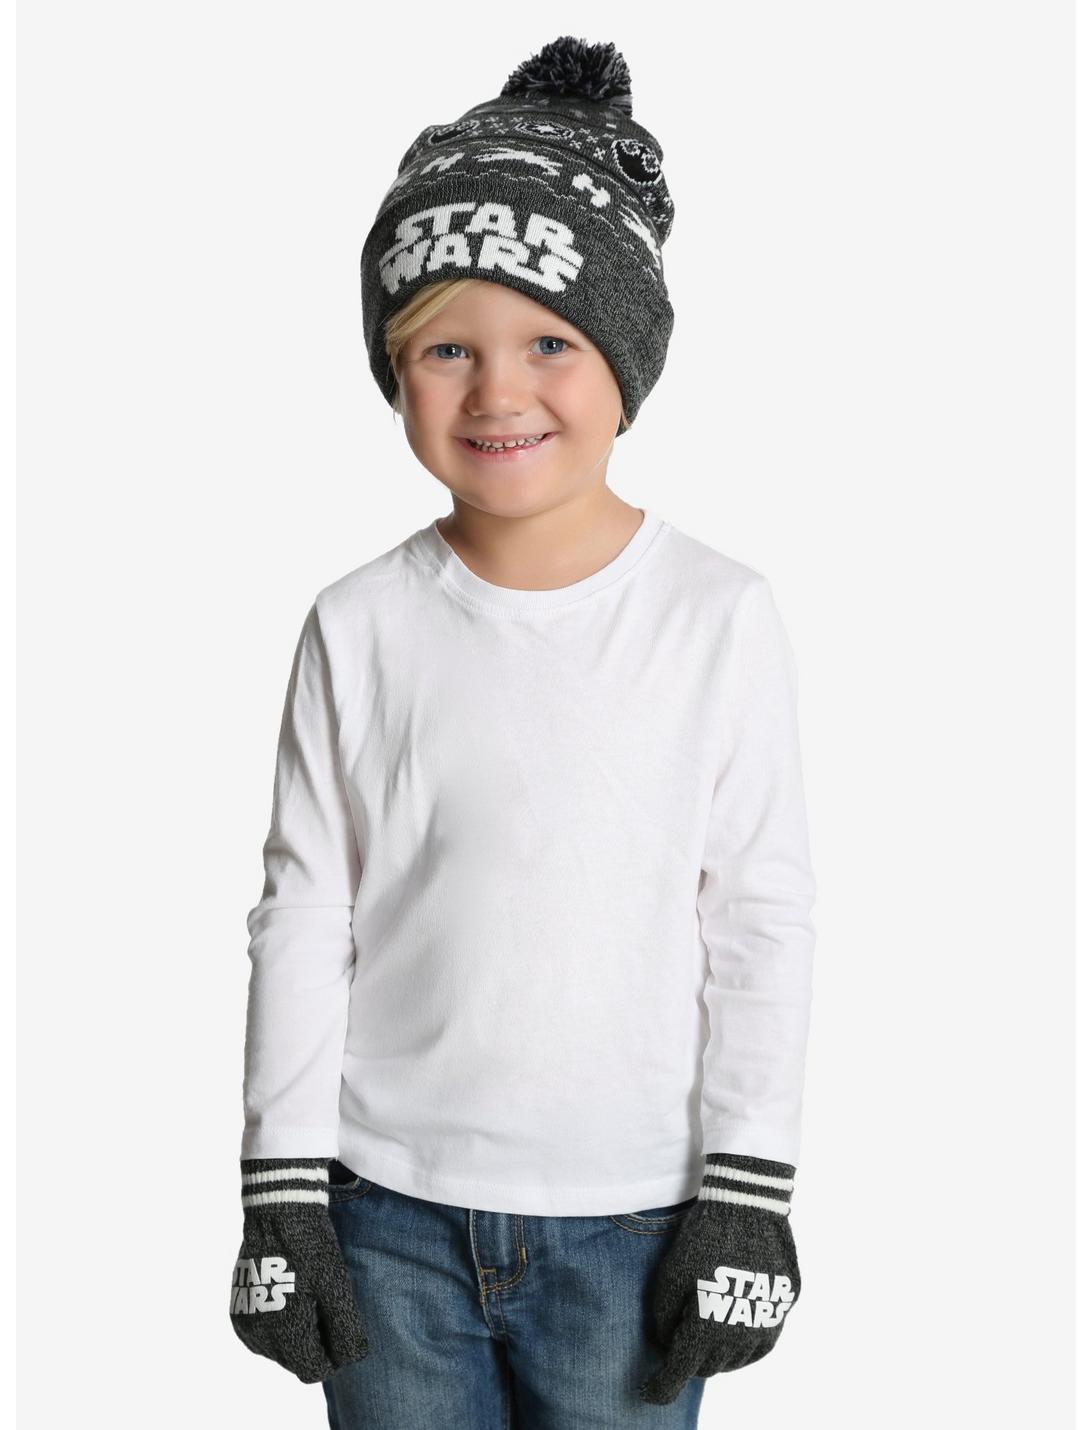 Star Wars Fair Isle Lightsaber Beanie And Glove Toddler Set - BoxLunch Exclusive, , hi-res